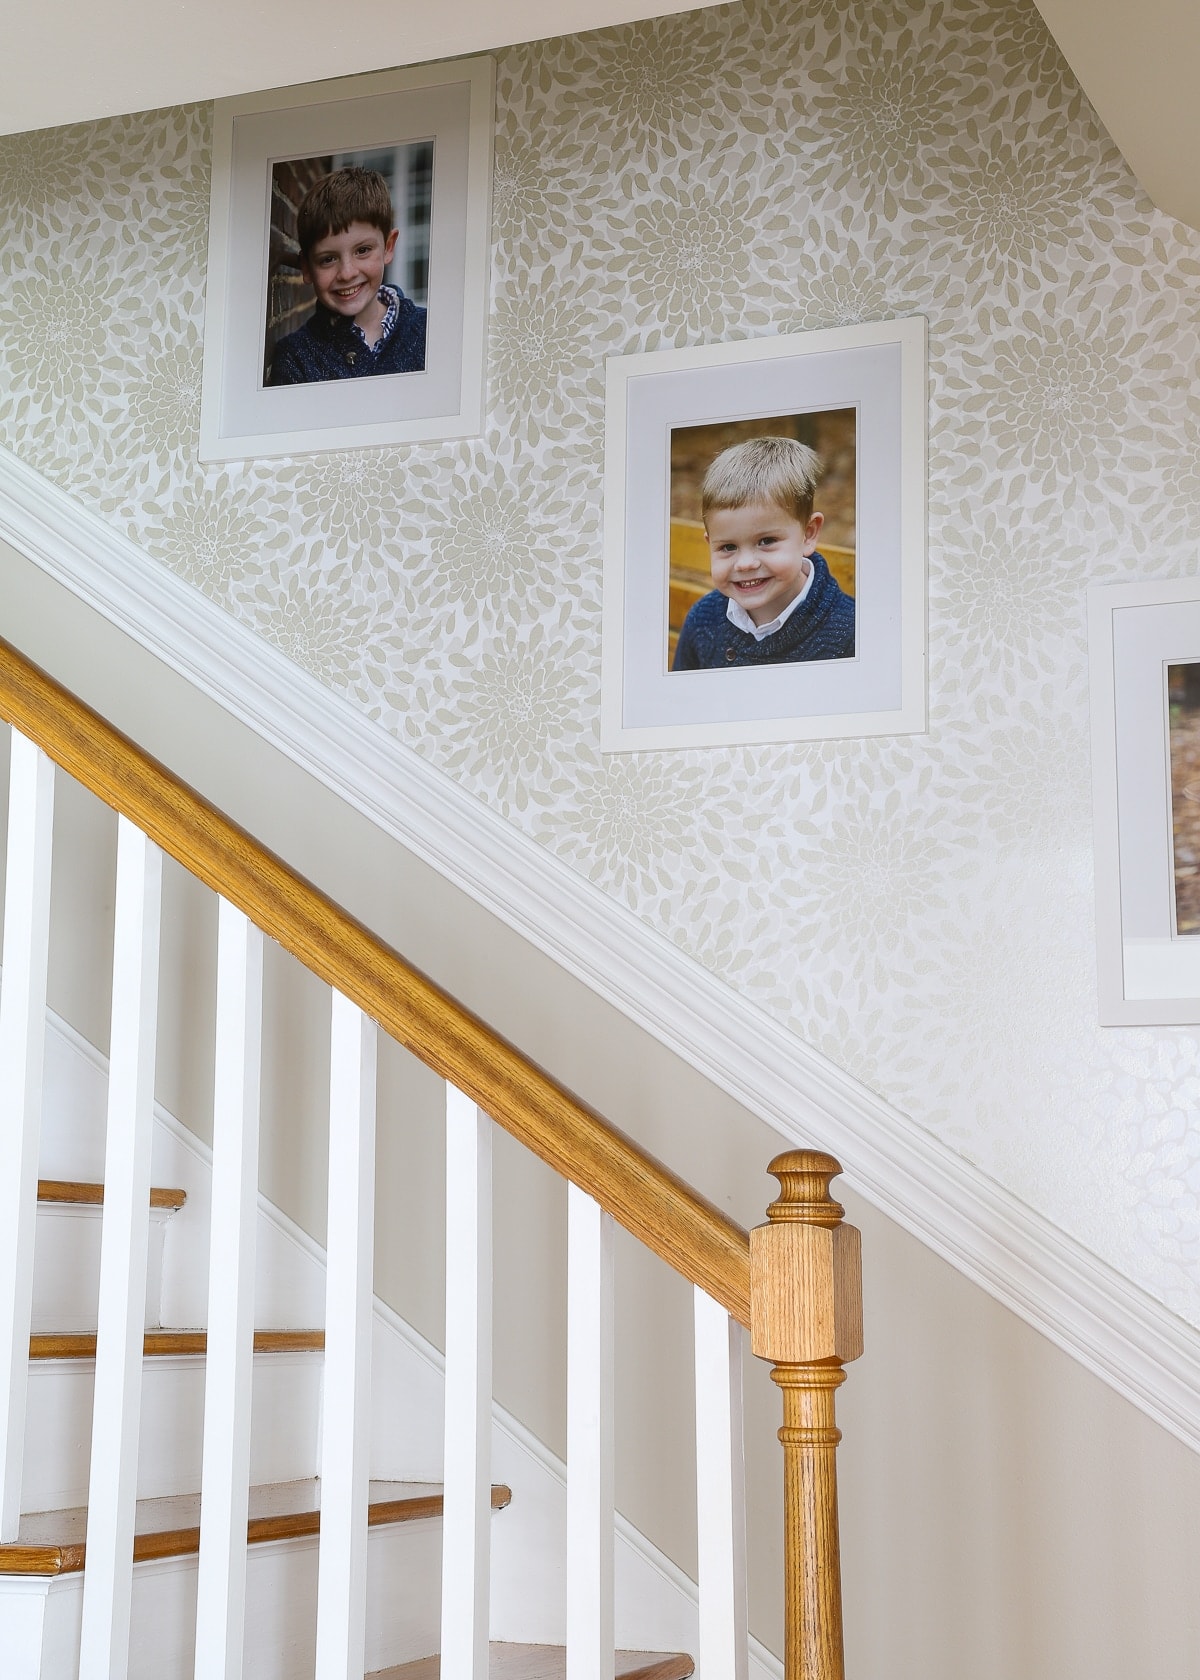 Decorating 101 Wallpapering  The Stairwell  Home Flair Decor  Blog